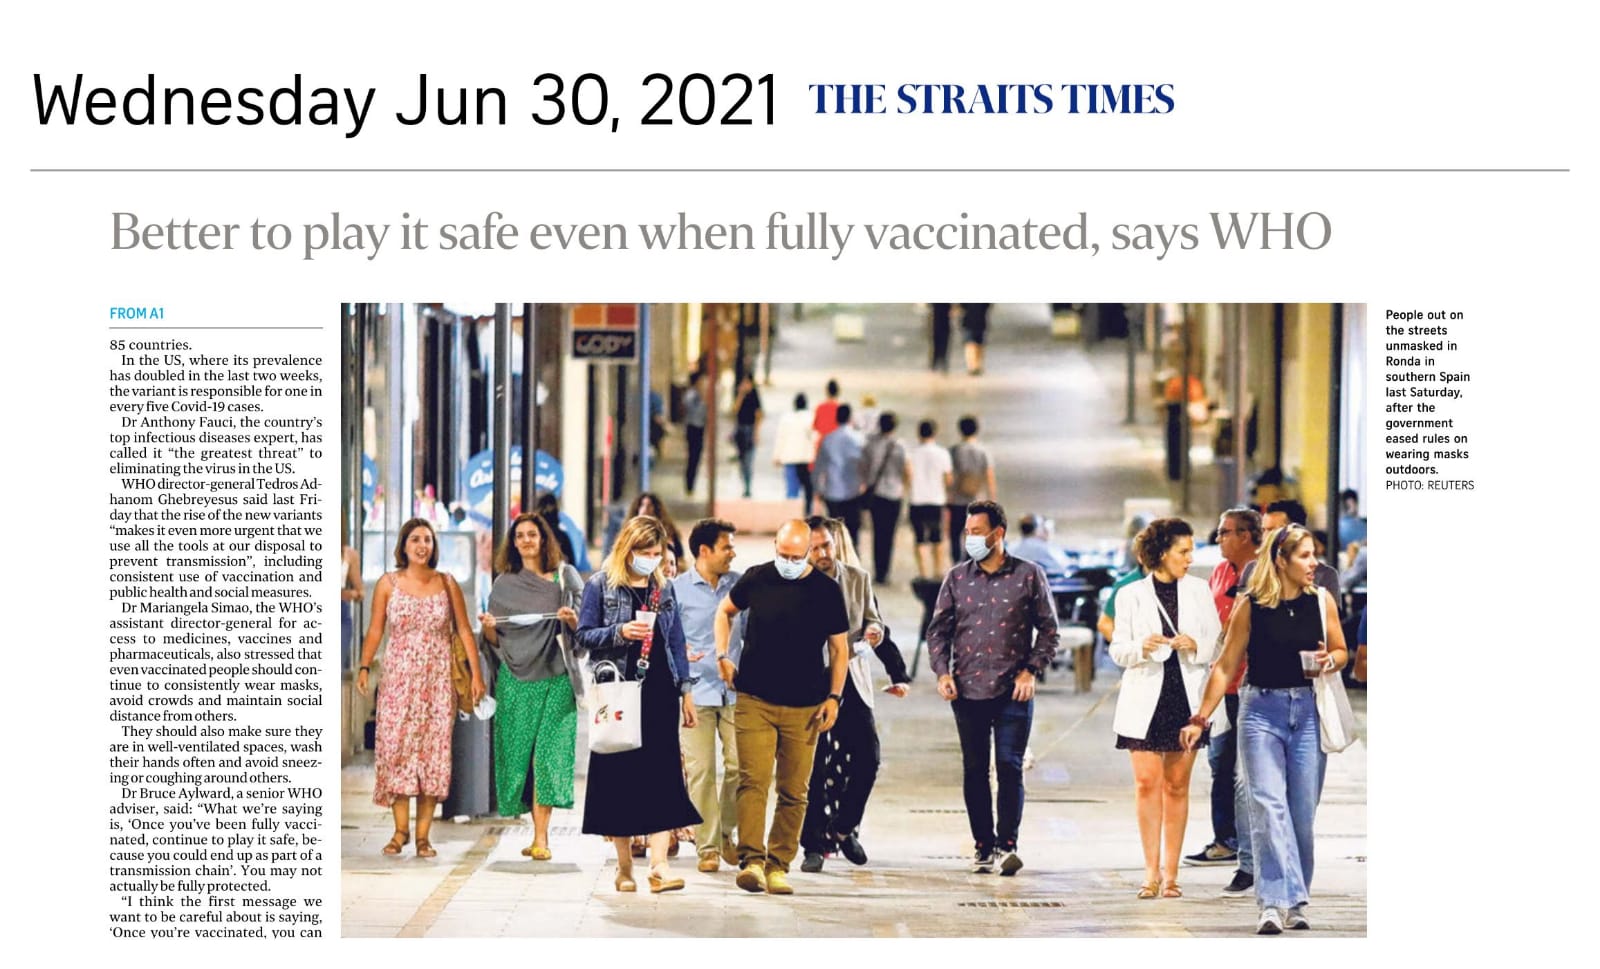 Better to Play It Safe Even When Fully Vaccinated, Says WHO - Published in The Straits Times June 30, 2021